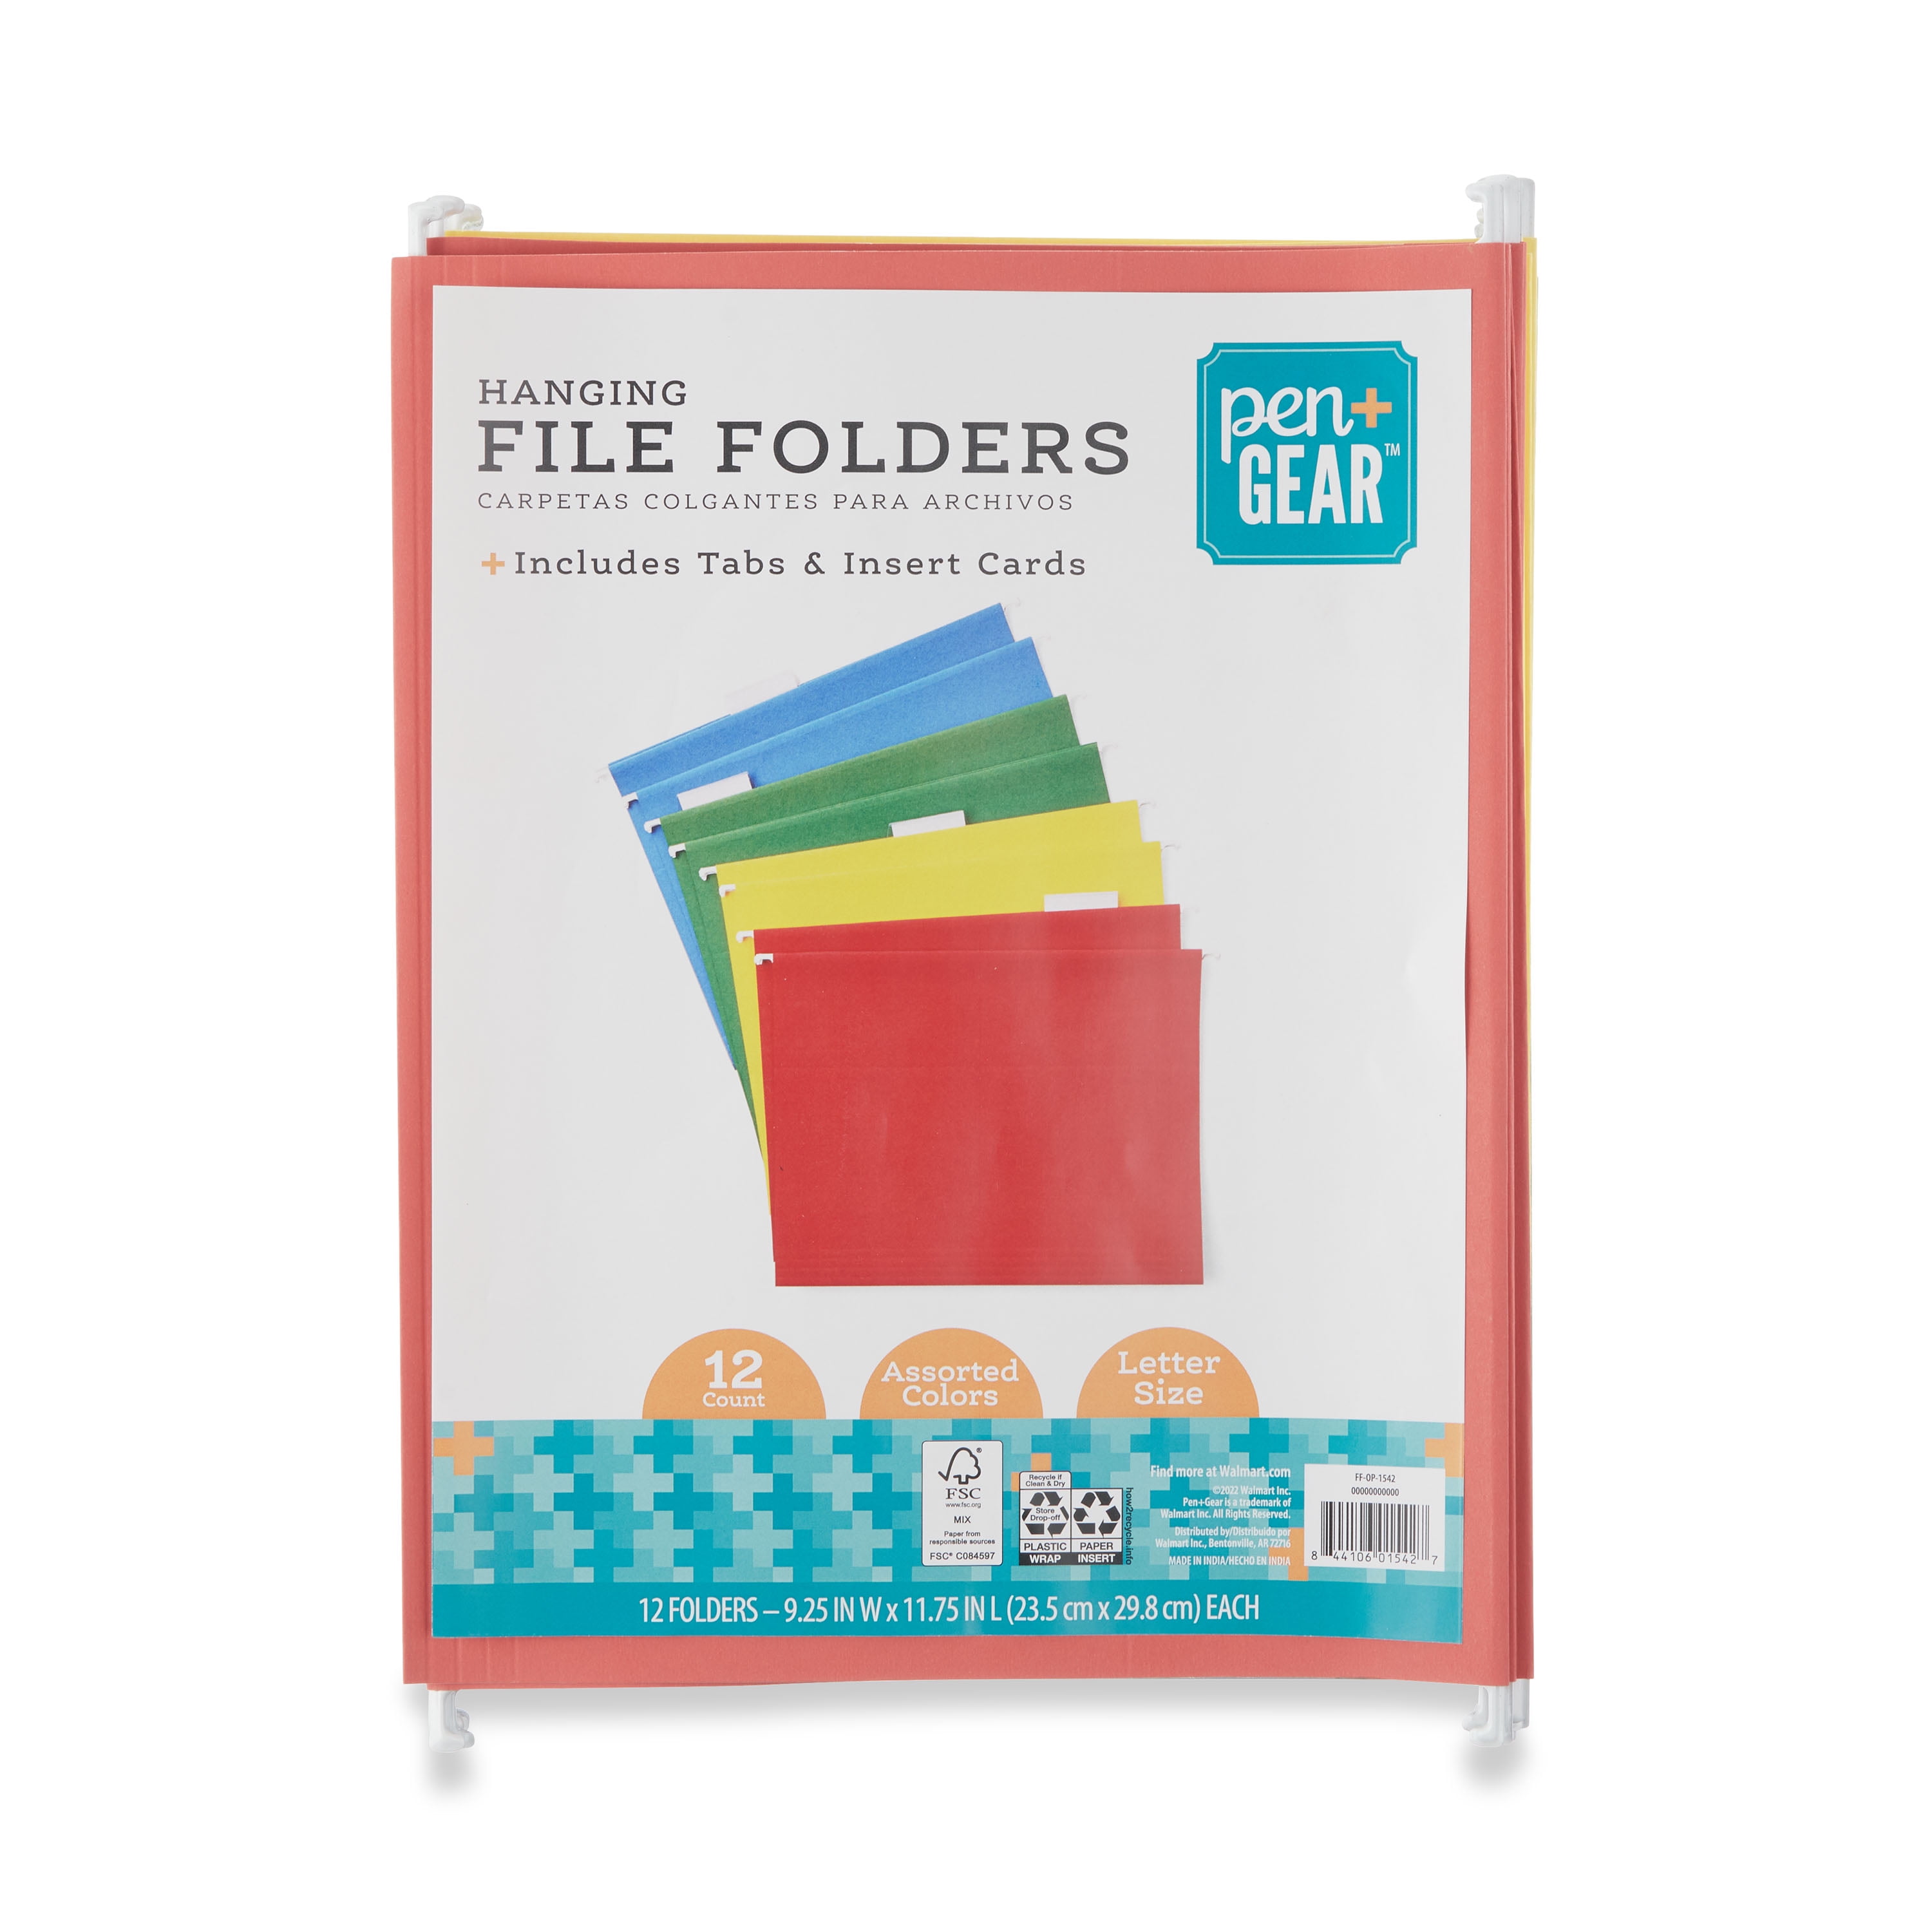 Pen+Gear Hanging File Folders with Tabs and Insert Cards, Assorted Colors, 12 Count, Letter Size